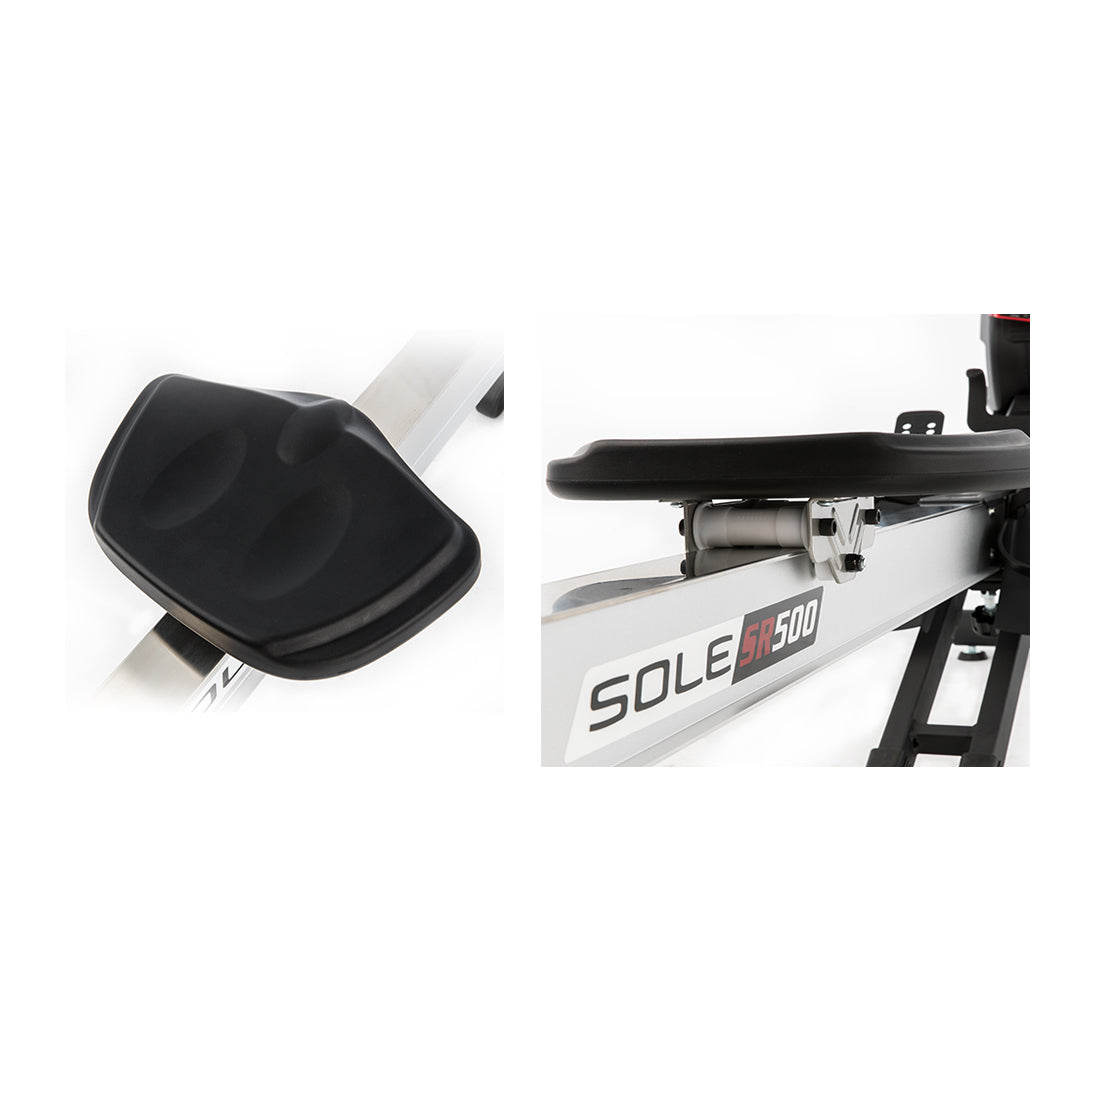 How to Use SR500 Rower Machine